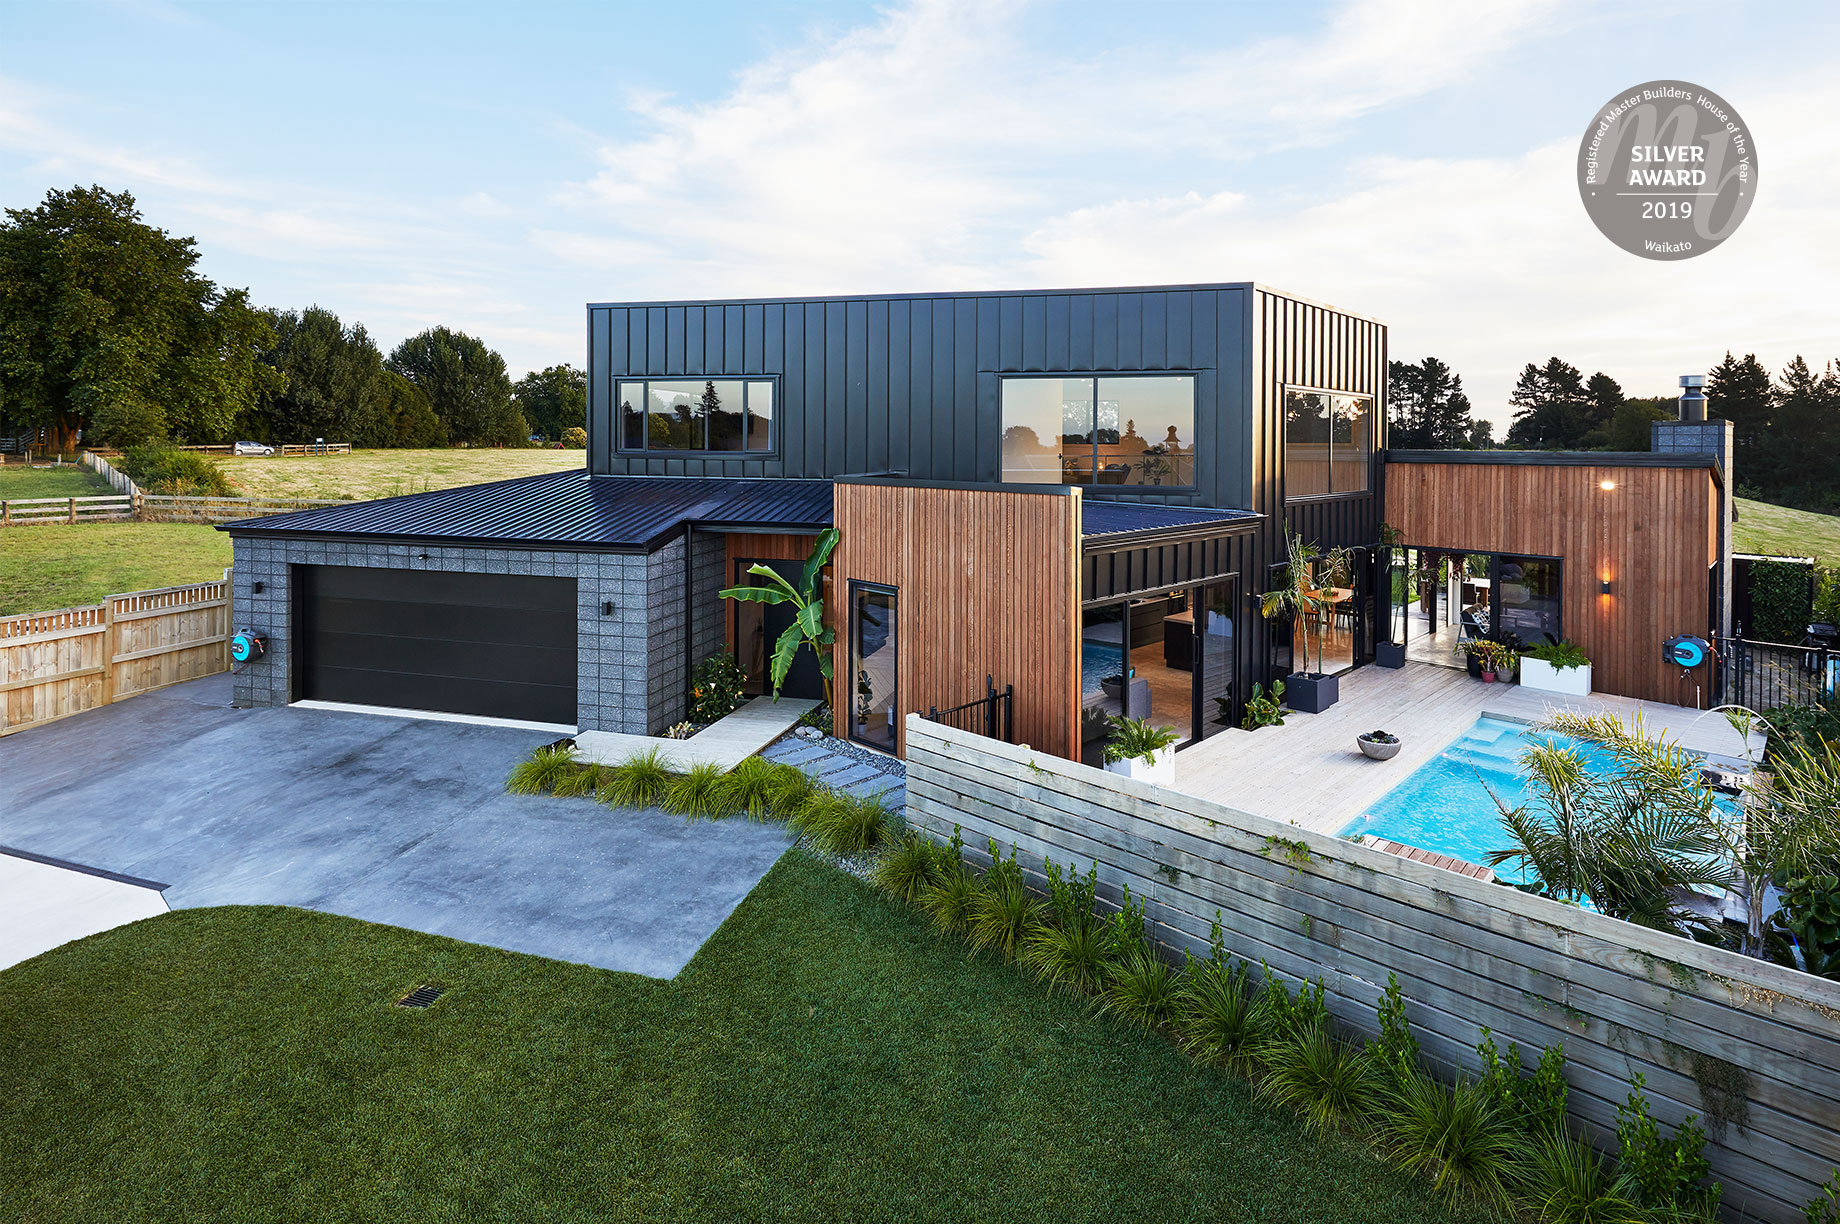 Award winning rural house exterior with a pool